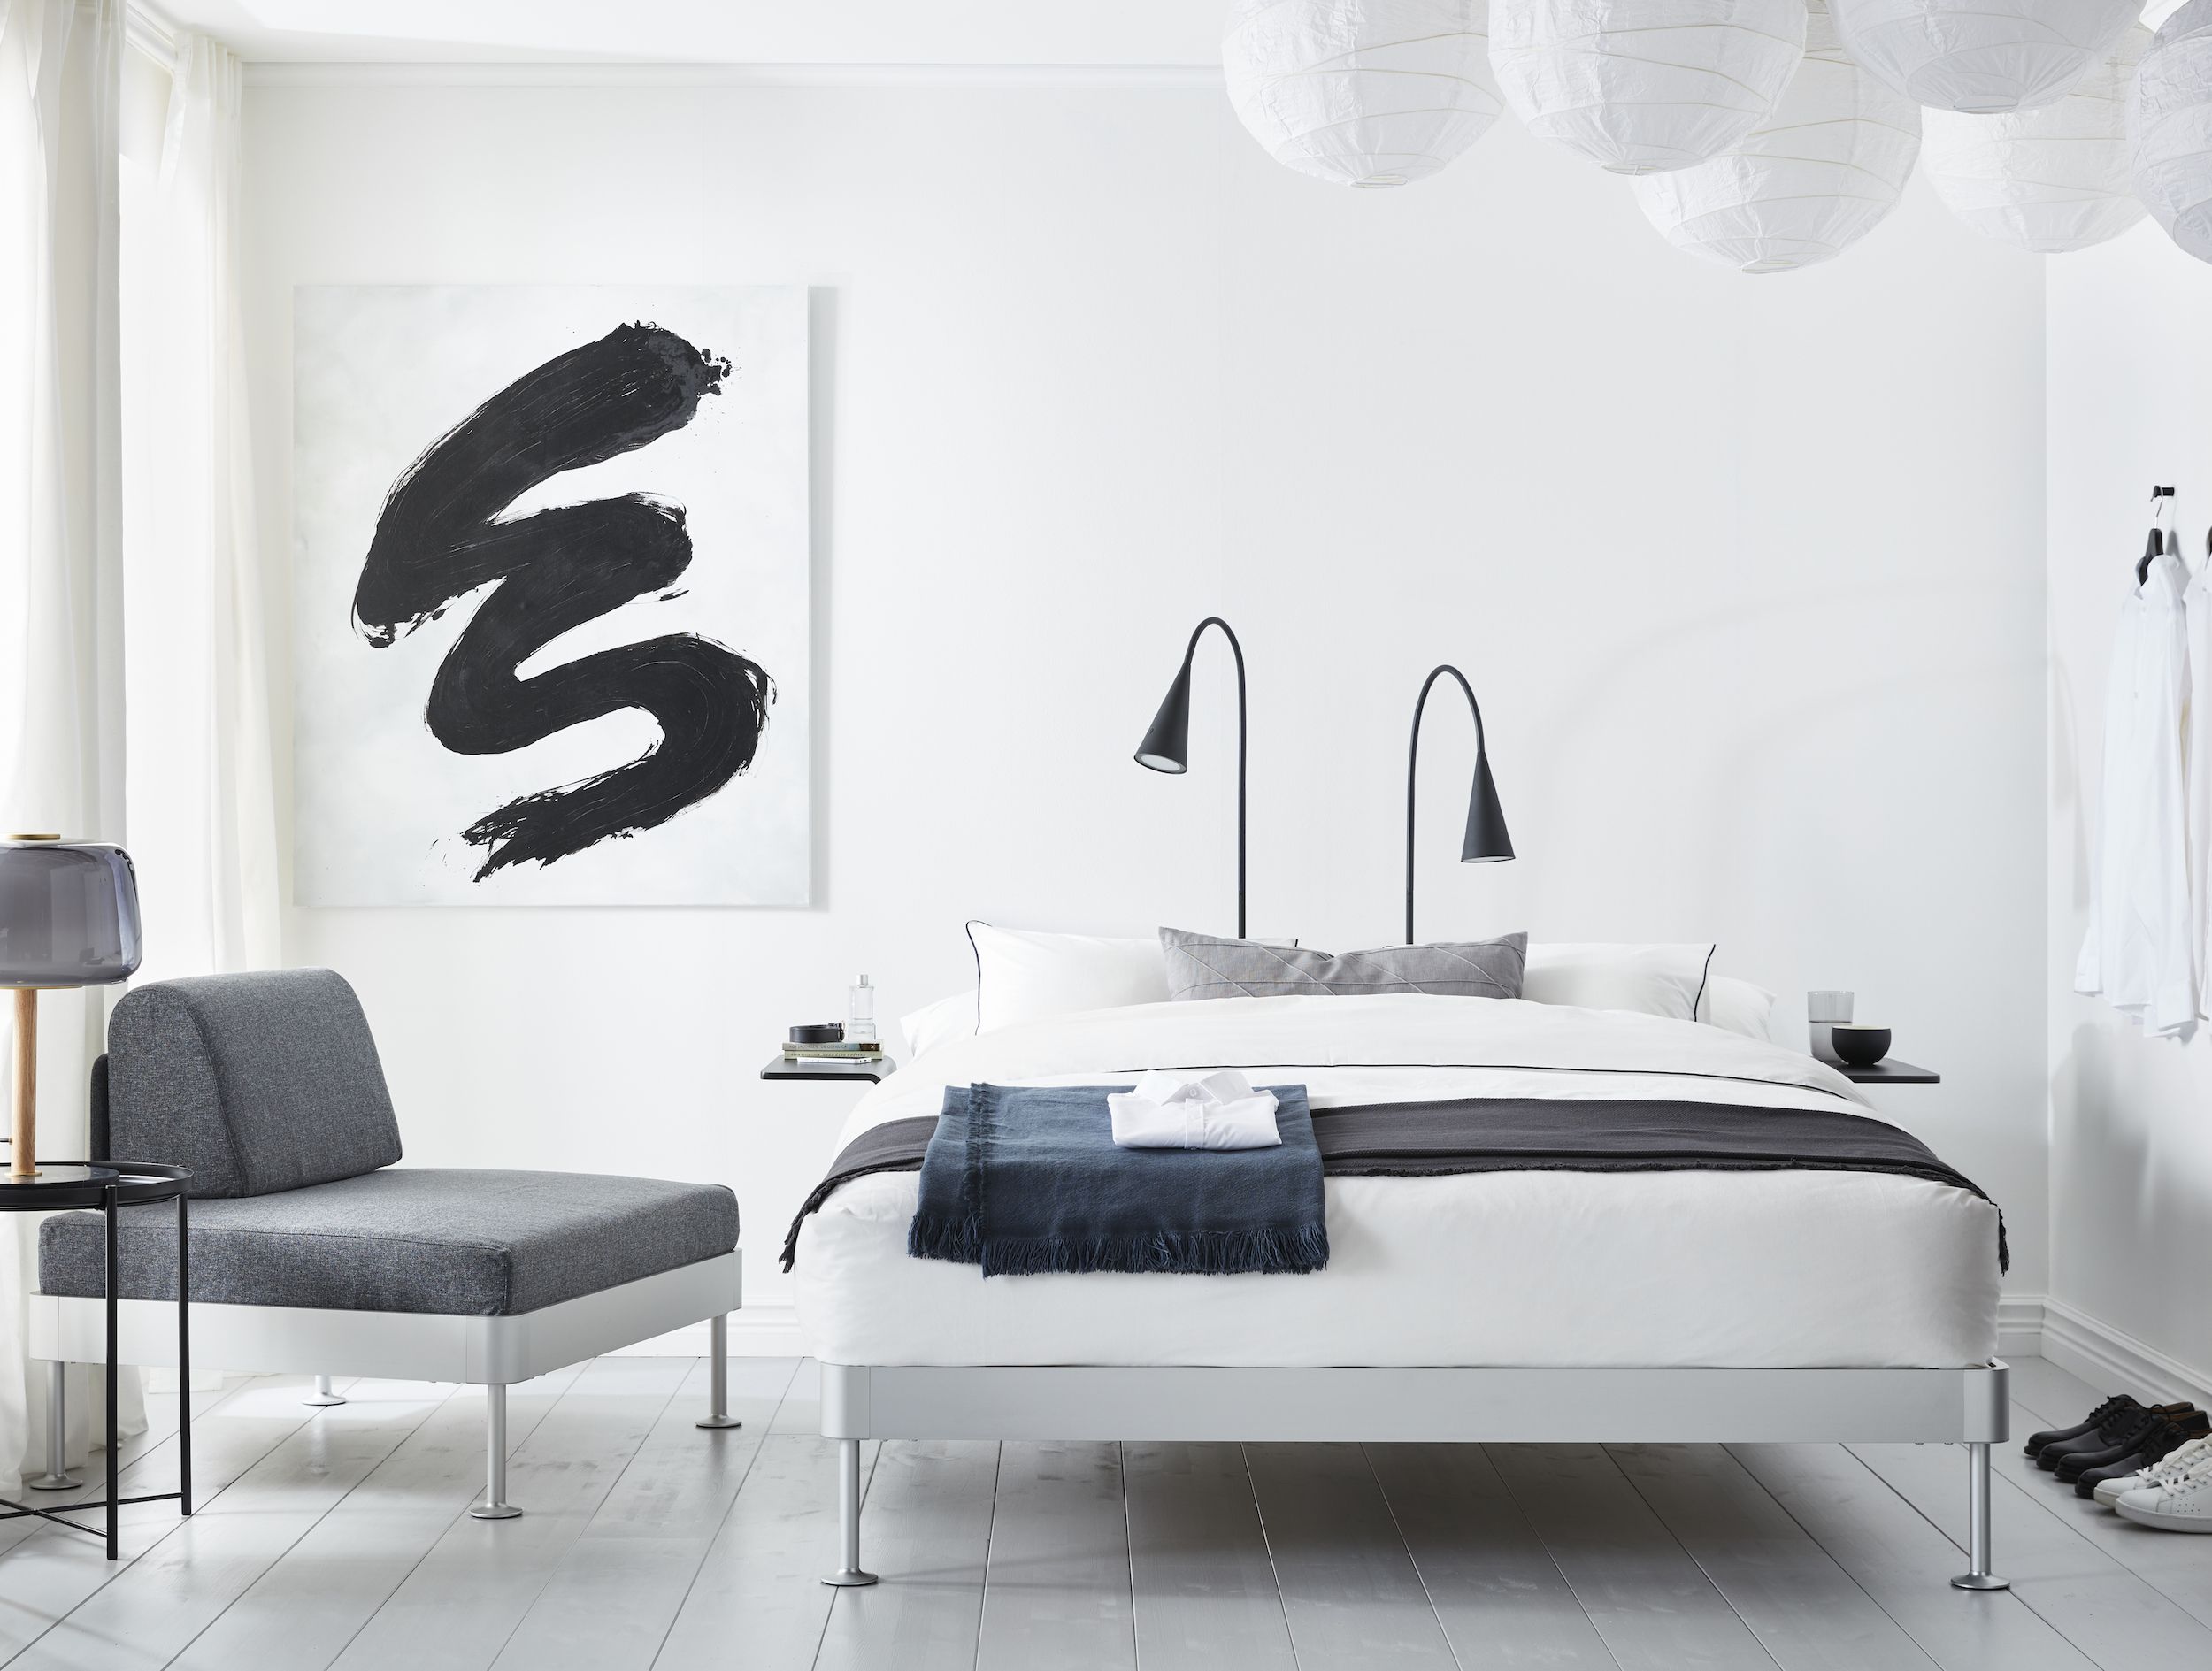 patrulje Ofre Skygge Tom Dixon Launched A Bedroom Line For Ikea That Makes Use of Every Inch of  Space You Have